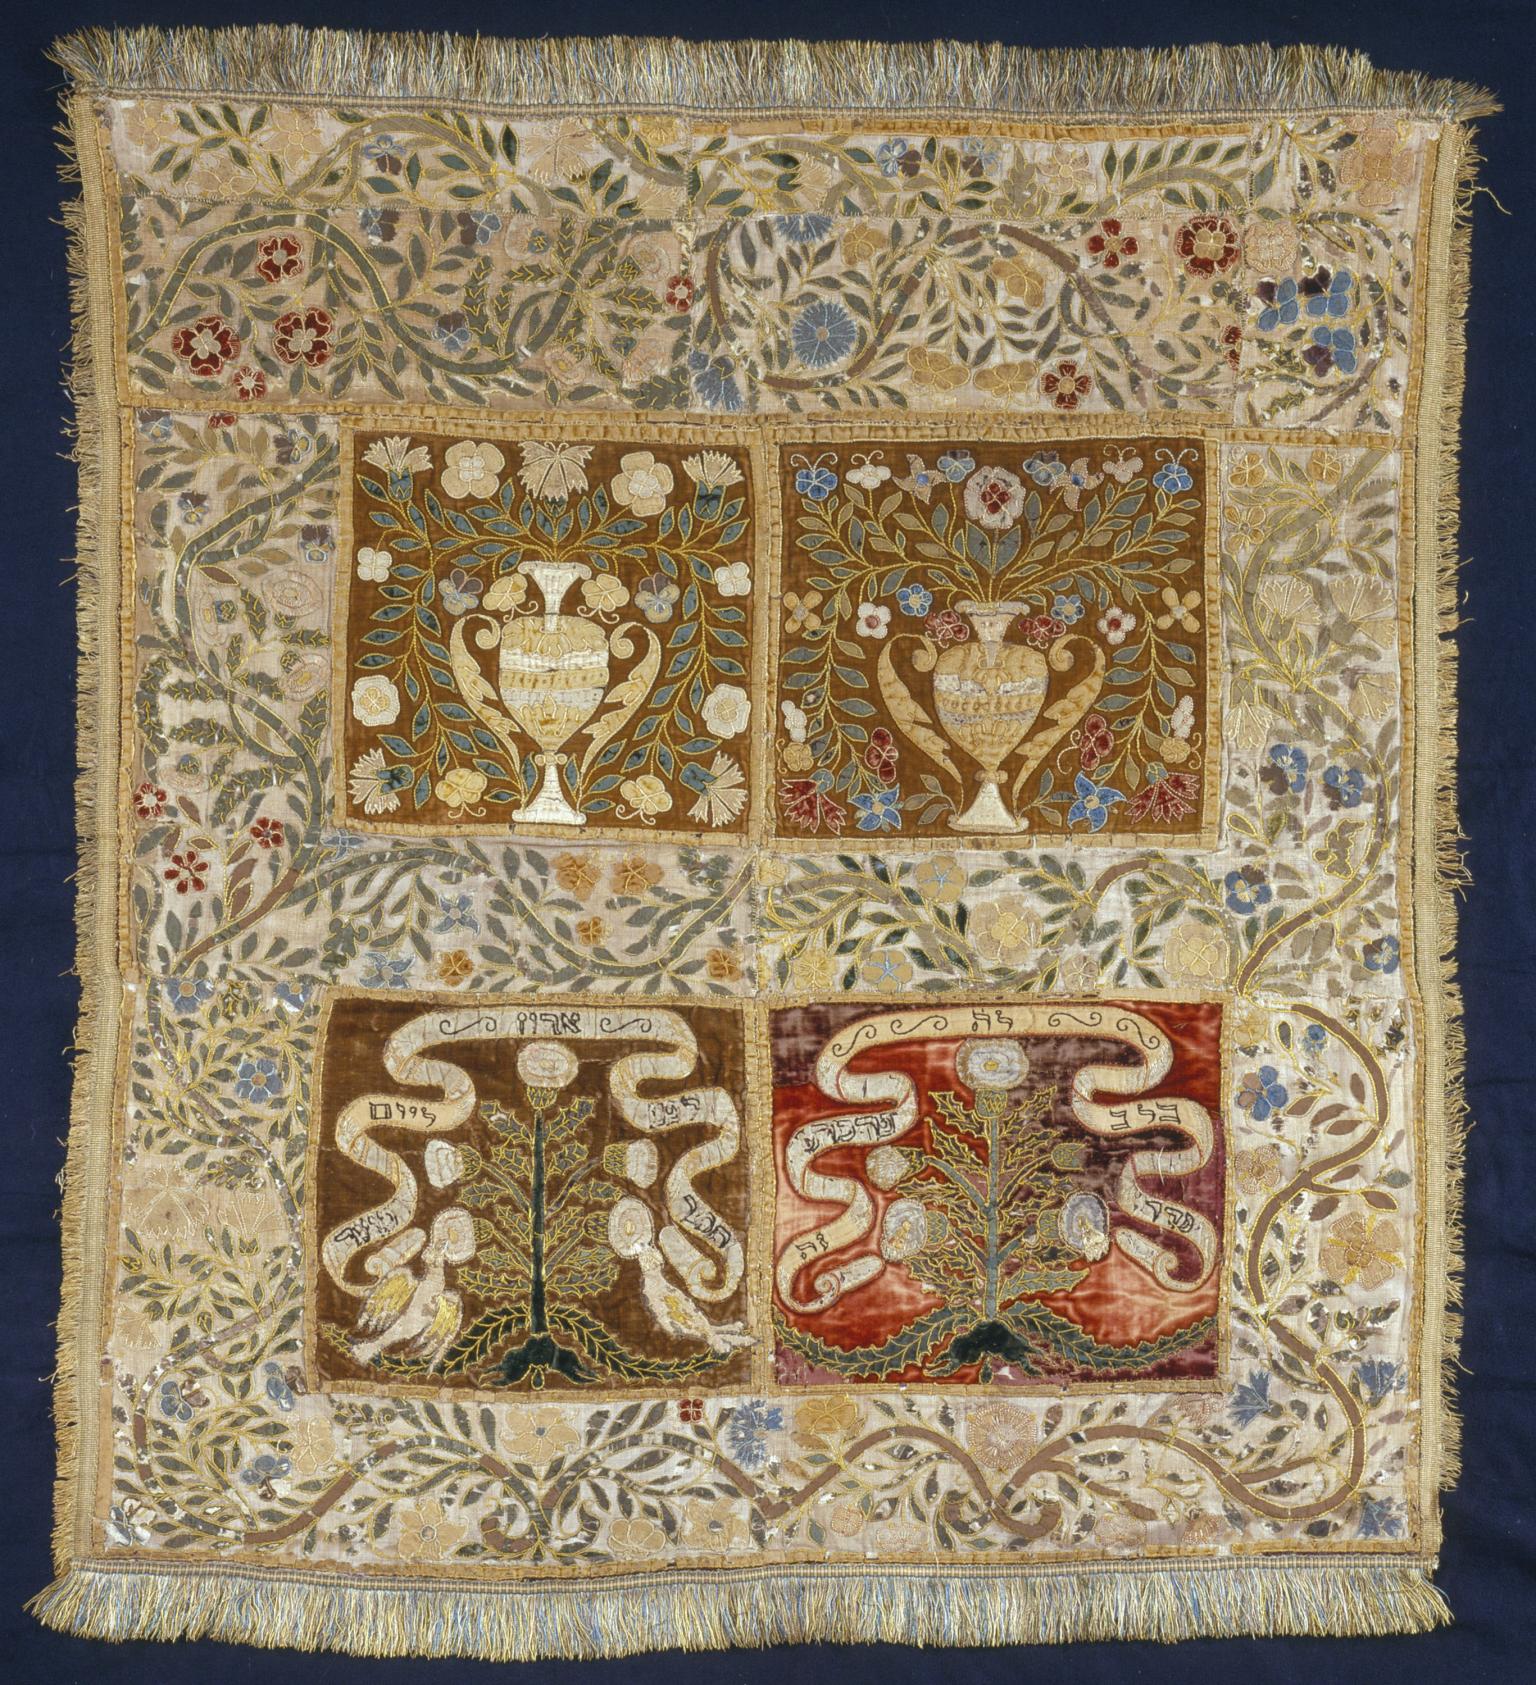 Cloth embroidered with floral border, and four central panels, the top two with pitchers, vines, and flowers, and the bottom two with trees and ribbons with Hebrew text. 